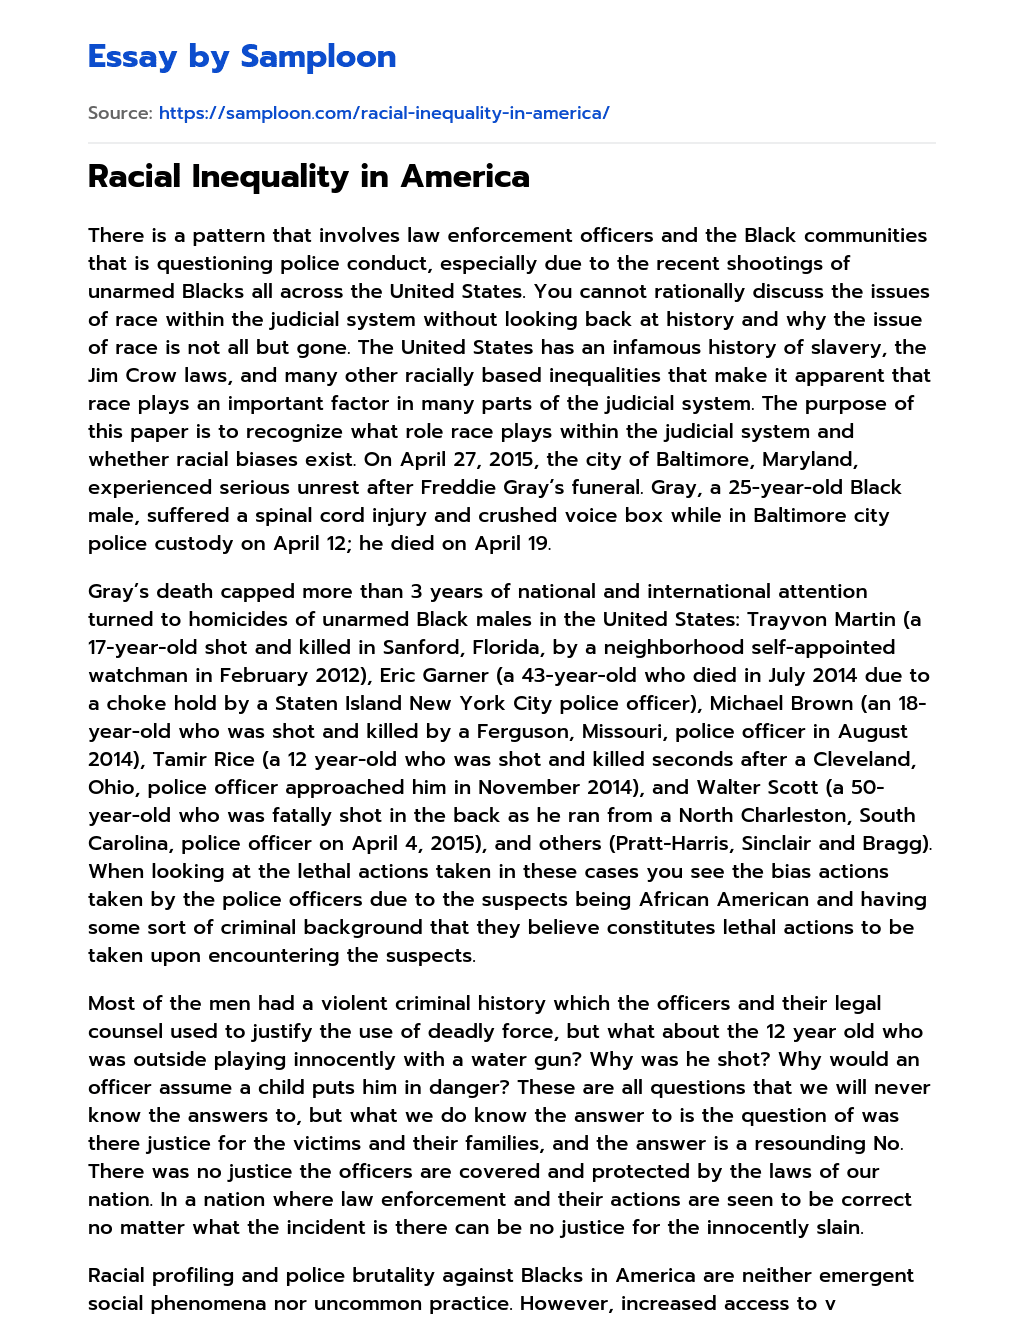 titles for racial inequality essay